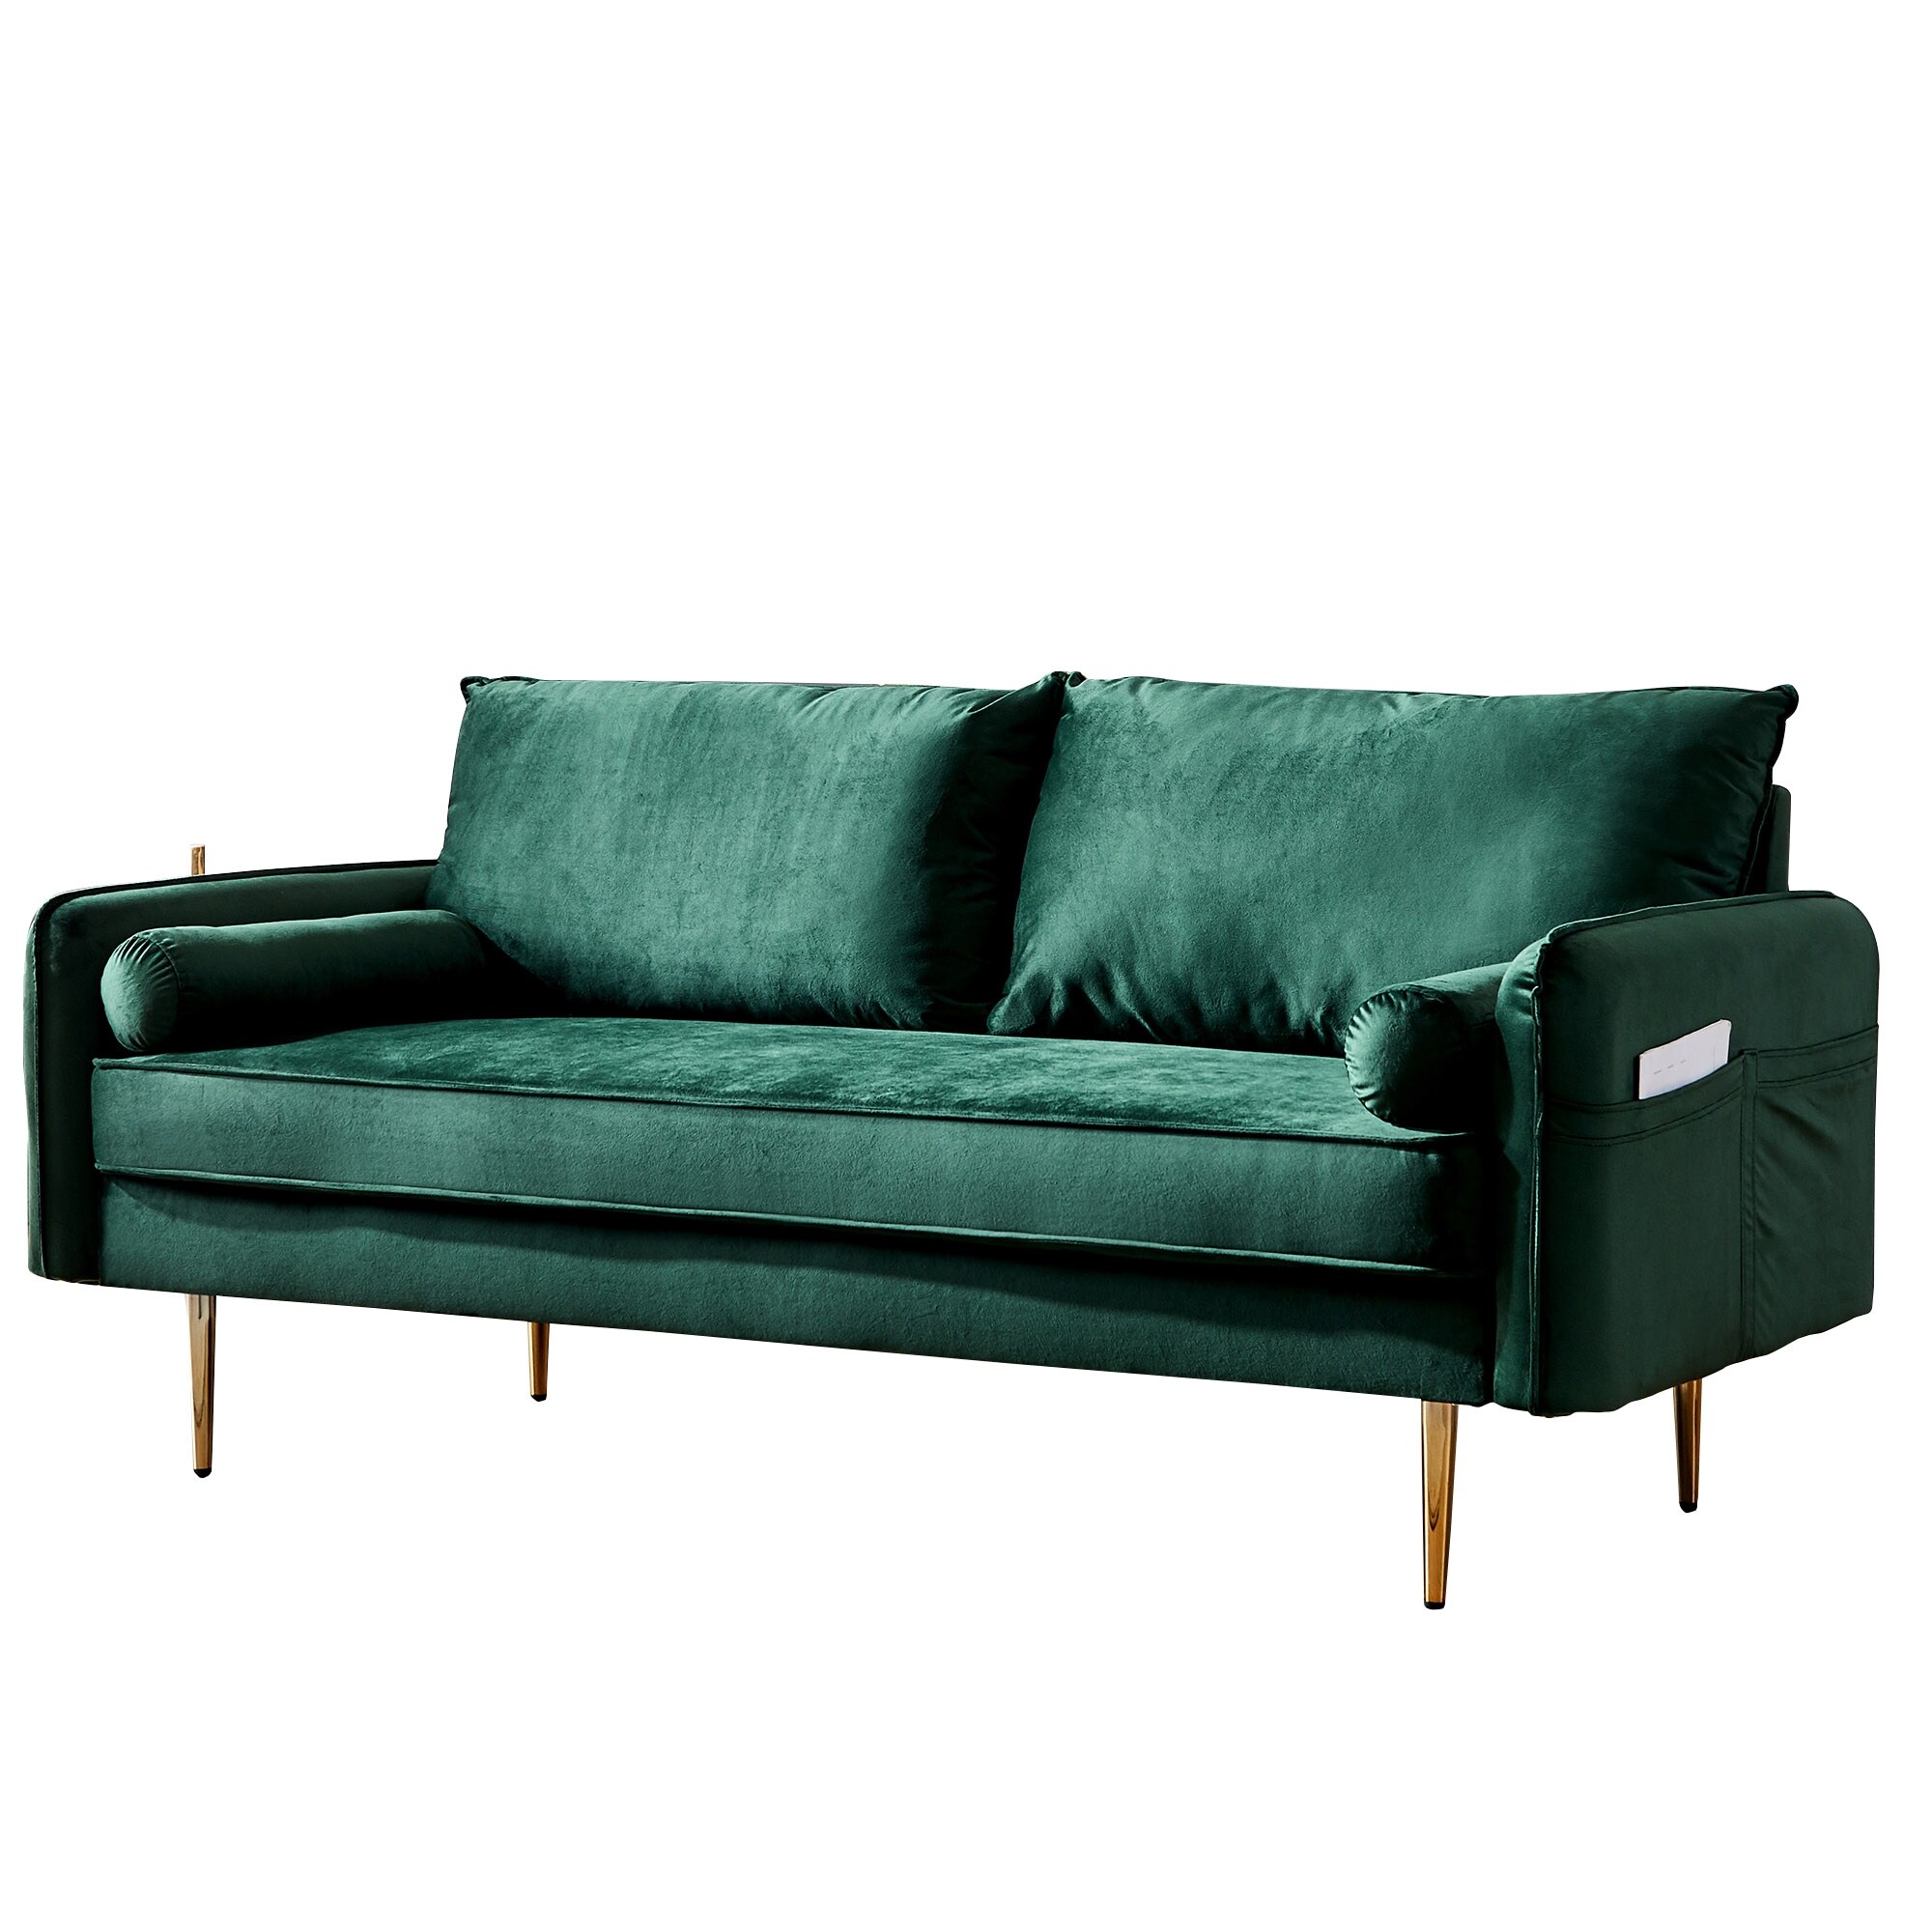 Velvet Fabric Convertible Futon Sofa with Armrest Pocket and Cushions